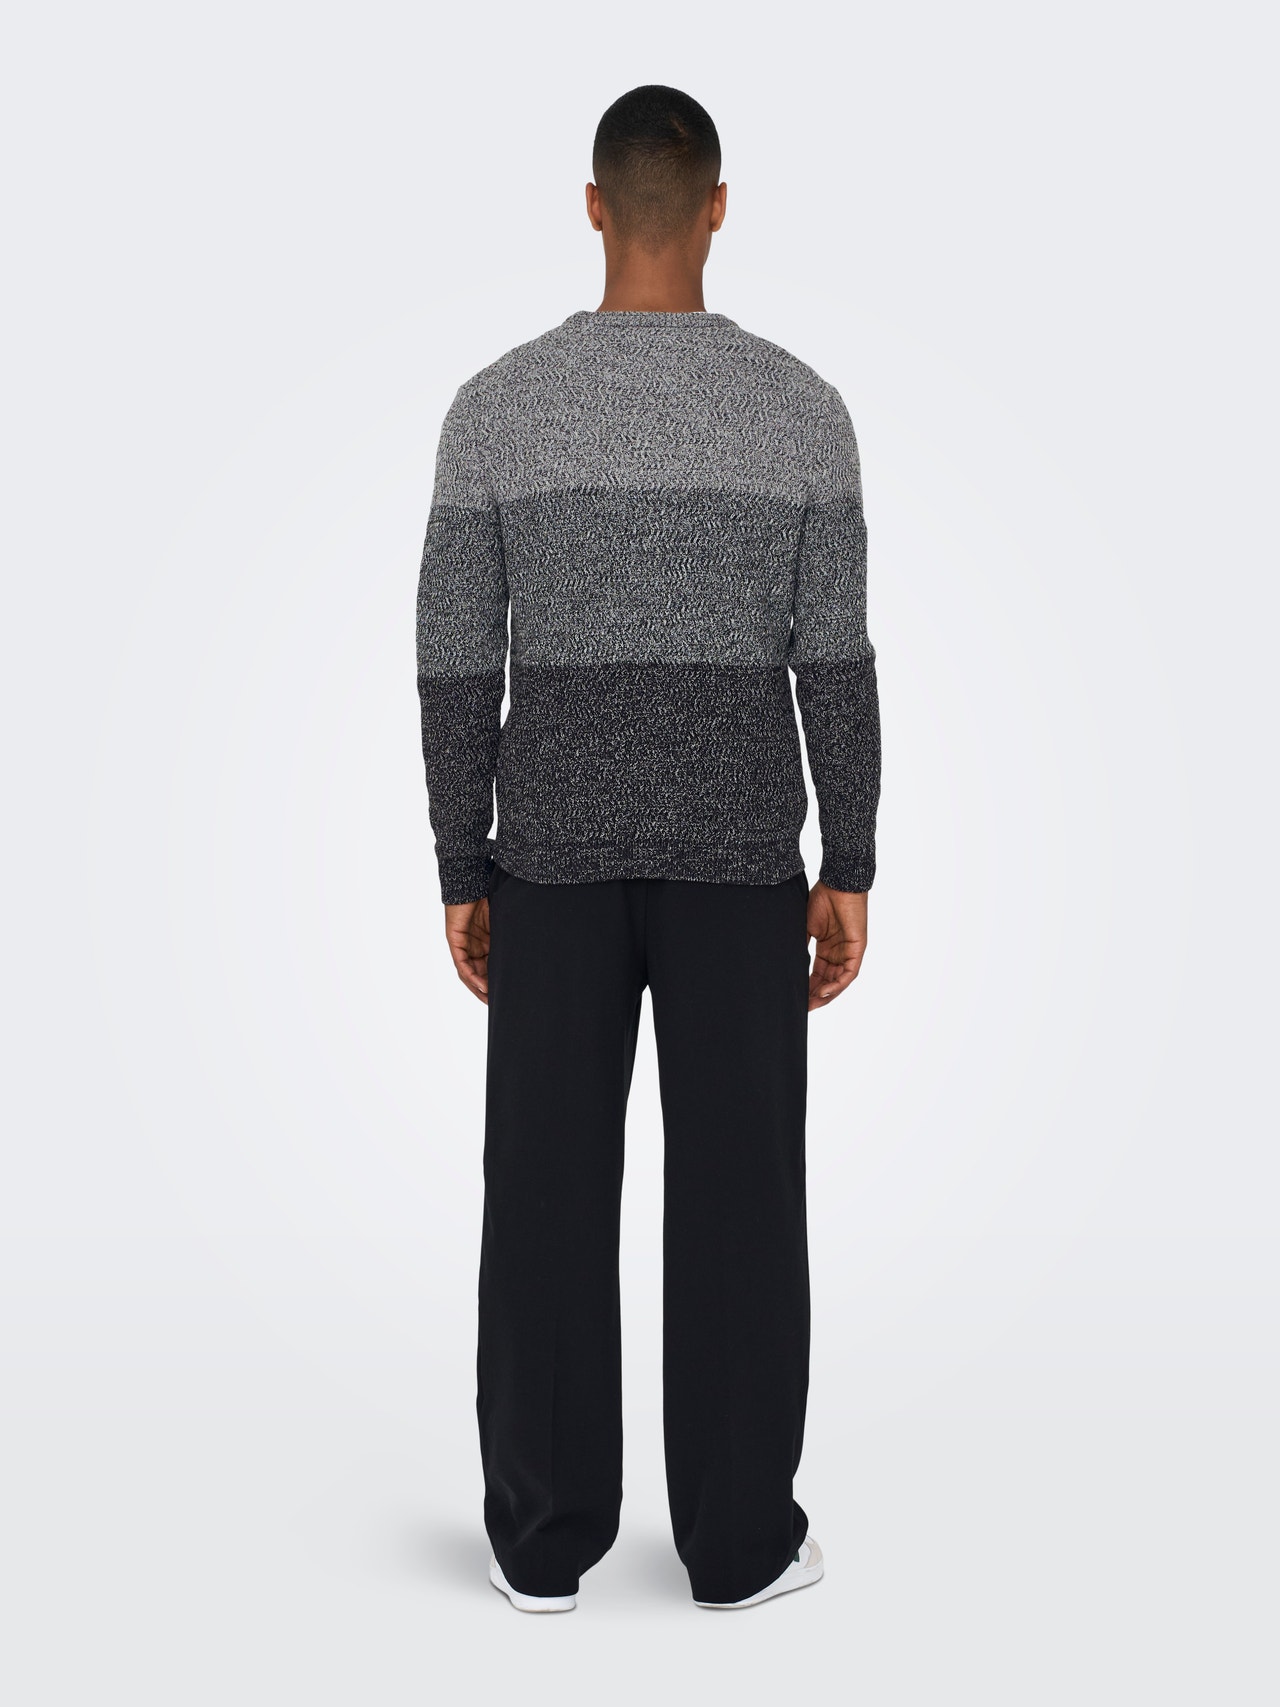 ONLY & SONS O-Neck Pullover -Black - 22023999